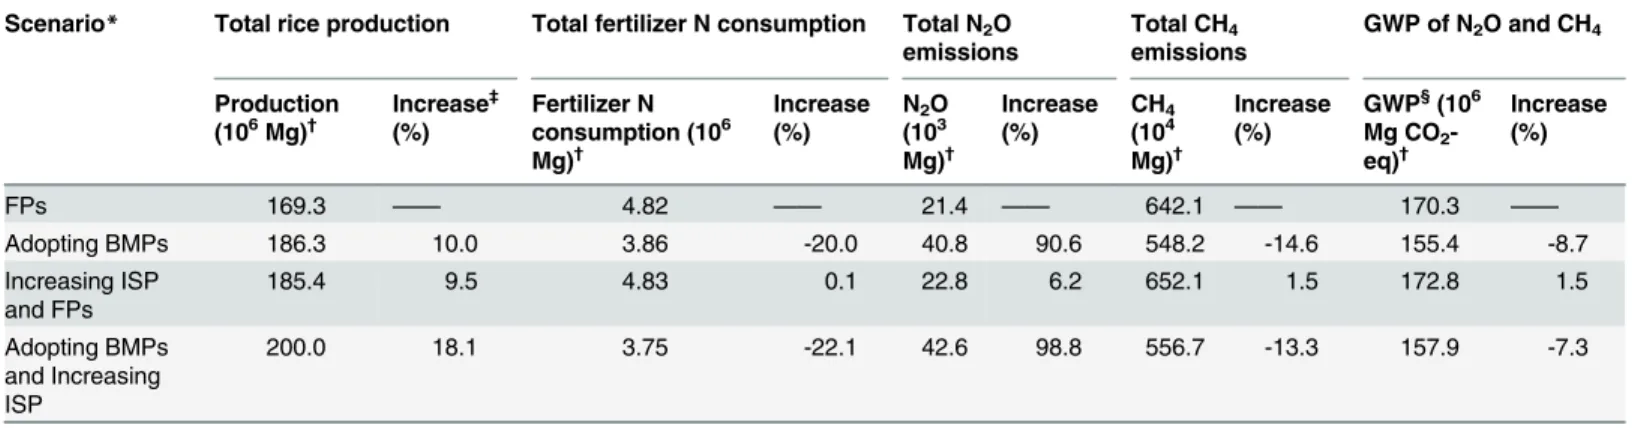 Table 2. Total rice production, N fertilizer consumption and greenhouse gas emissions (N 2 O, CH 4 and GWP) across Chinese major rice farming systems following different strategies.